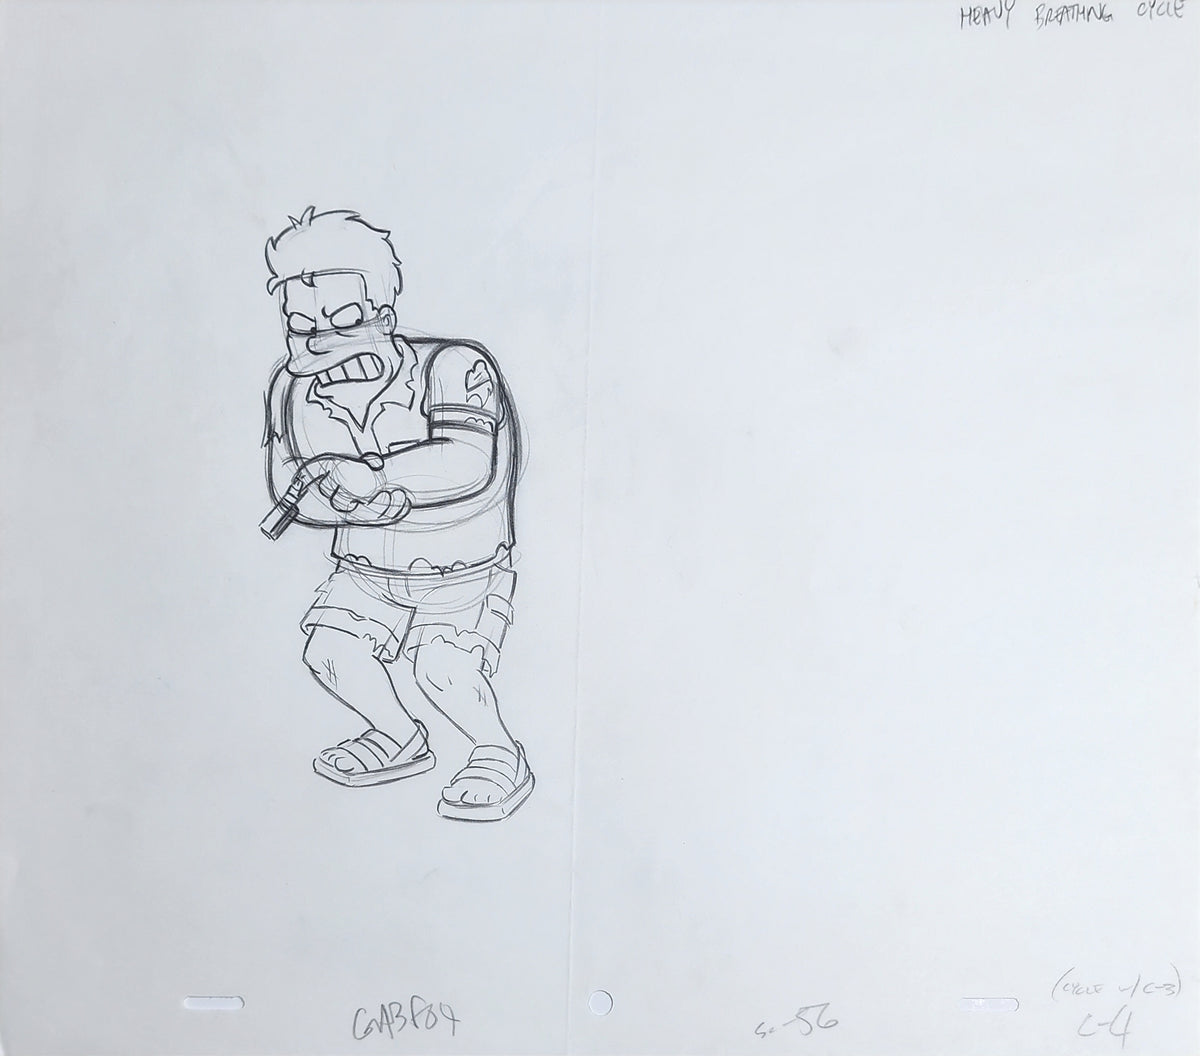 Simpsons Animation Production Cel Drawing - 3808